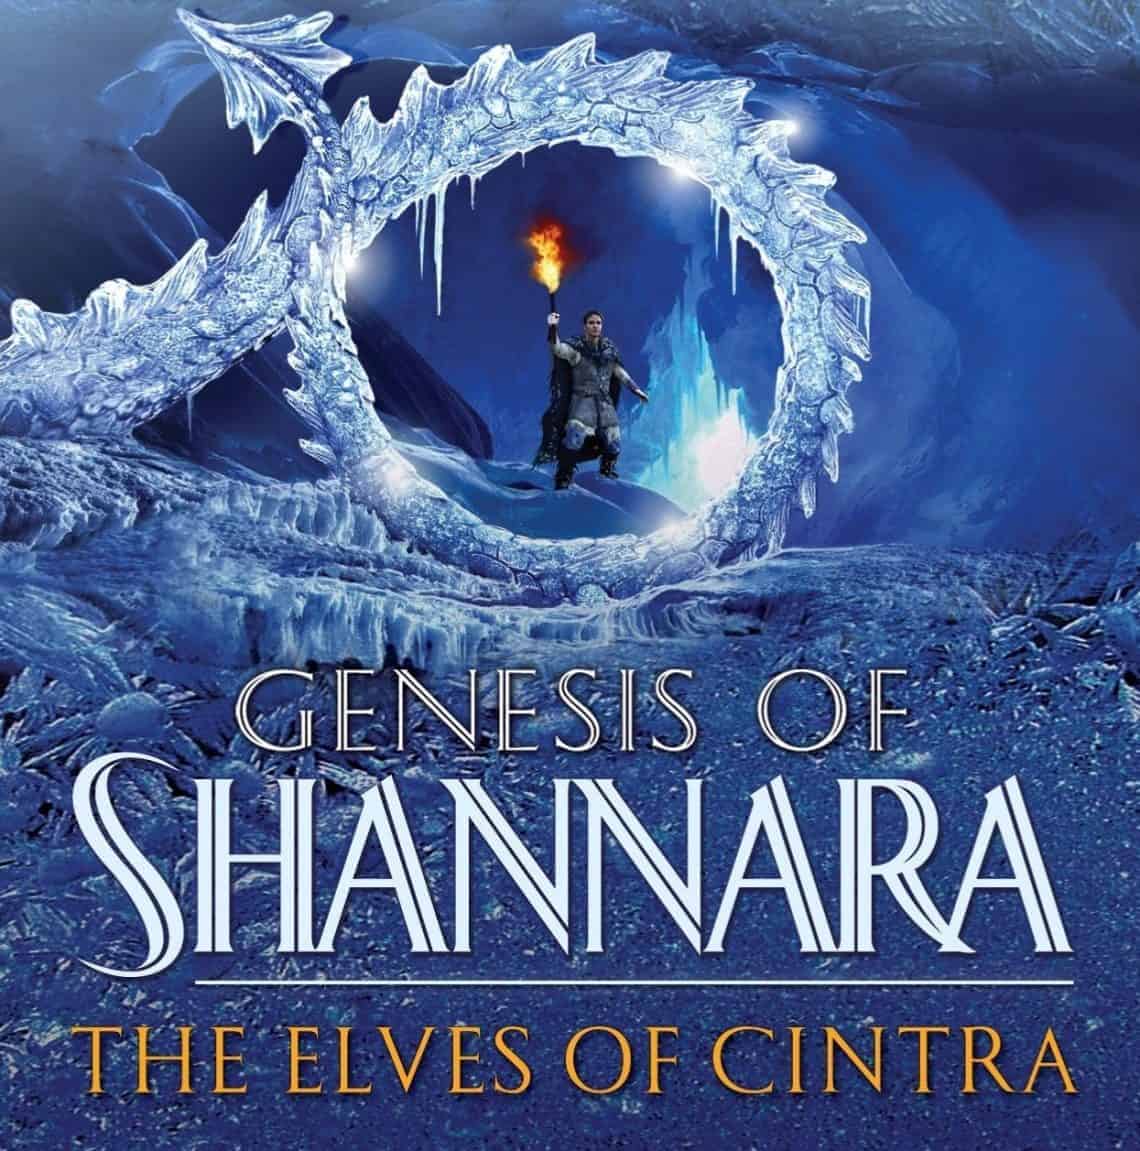 The Elves of Cintra Audiobook Free Download and Listen